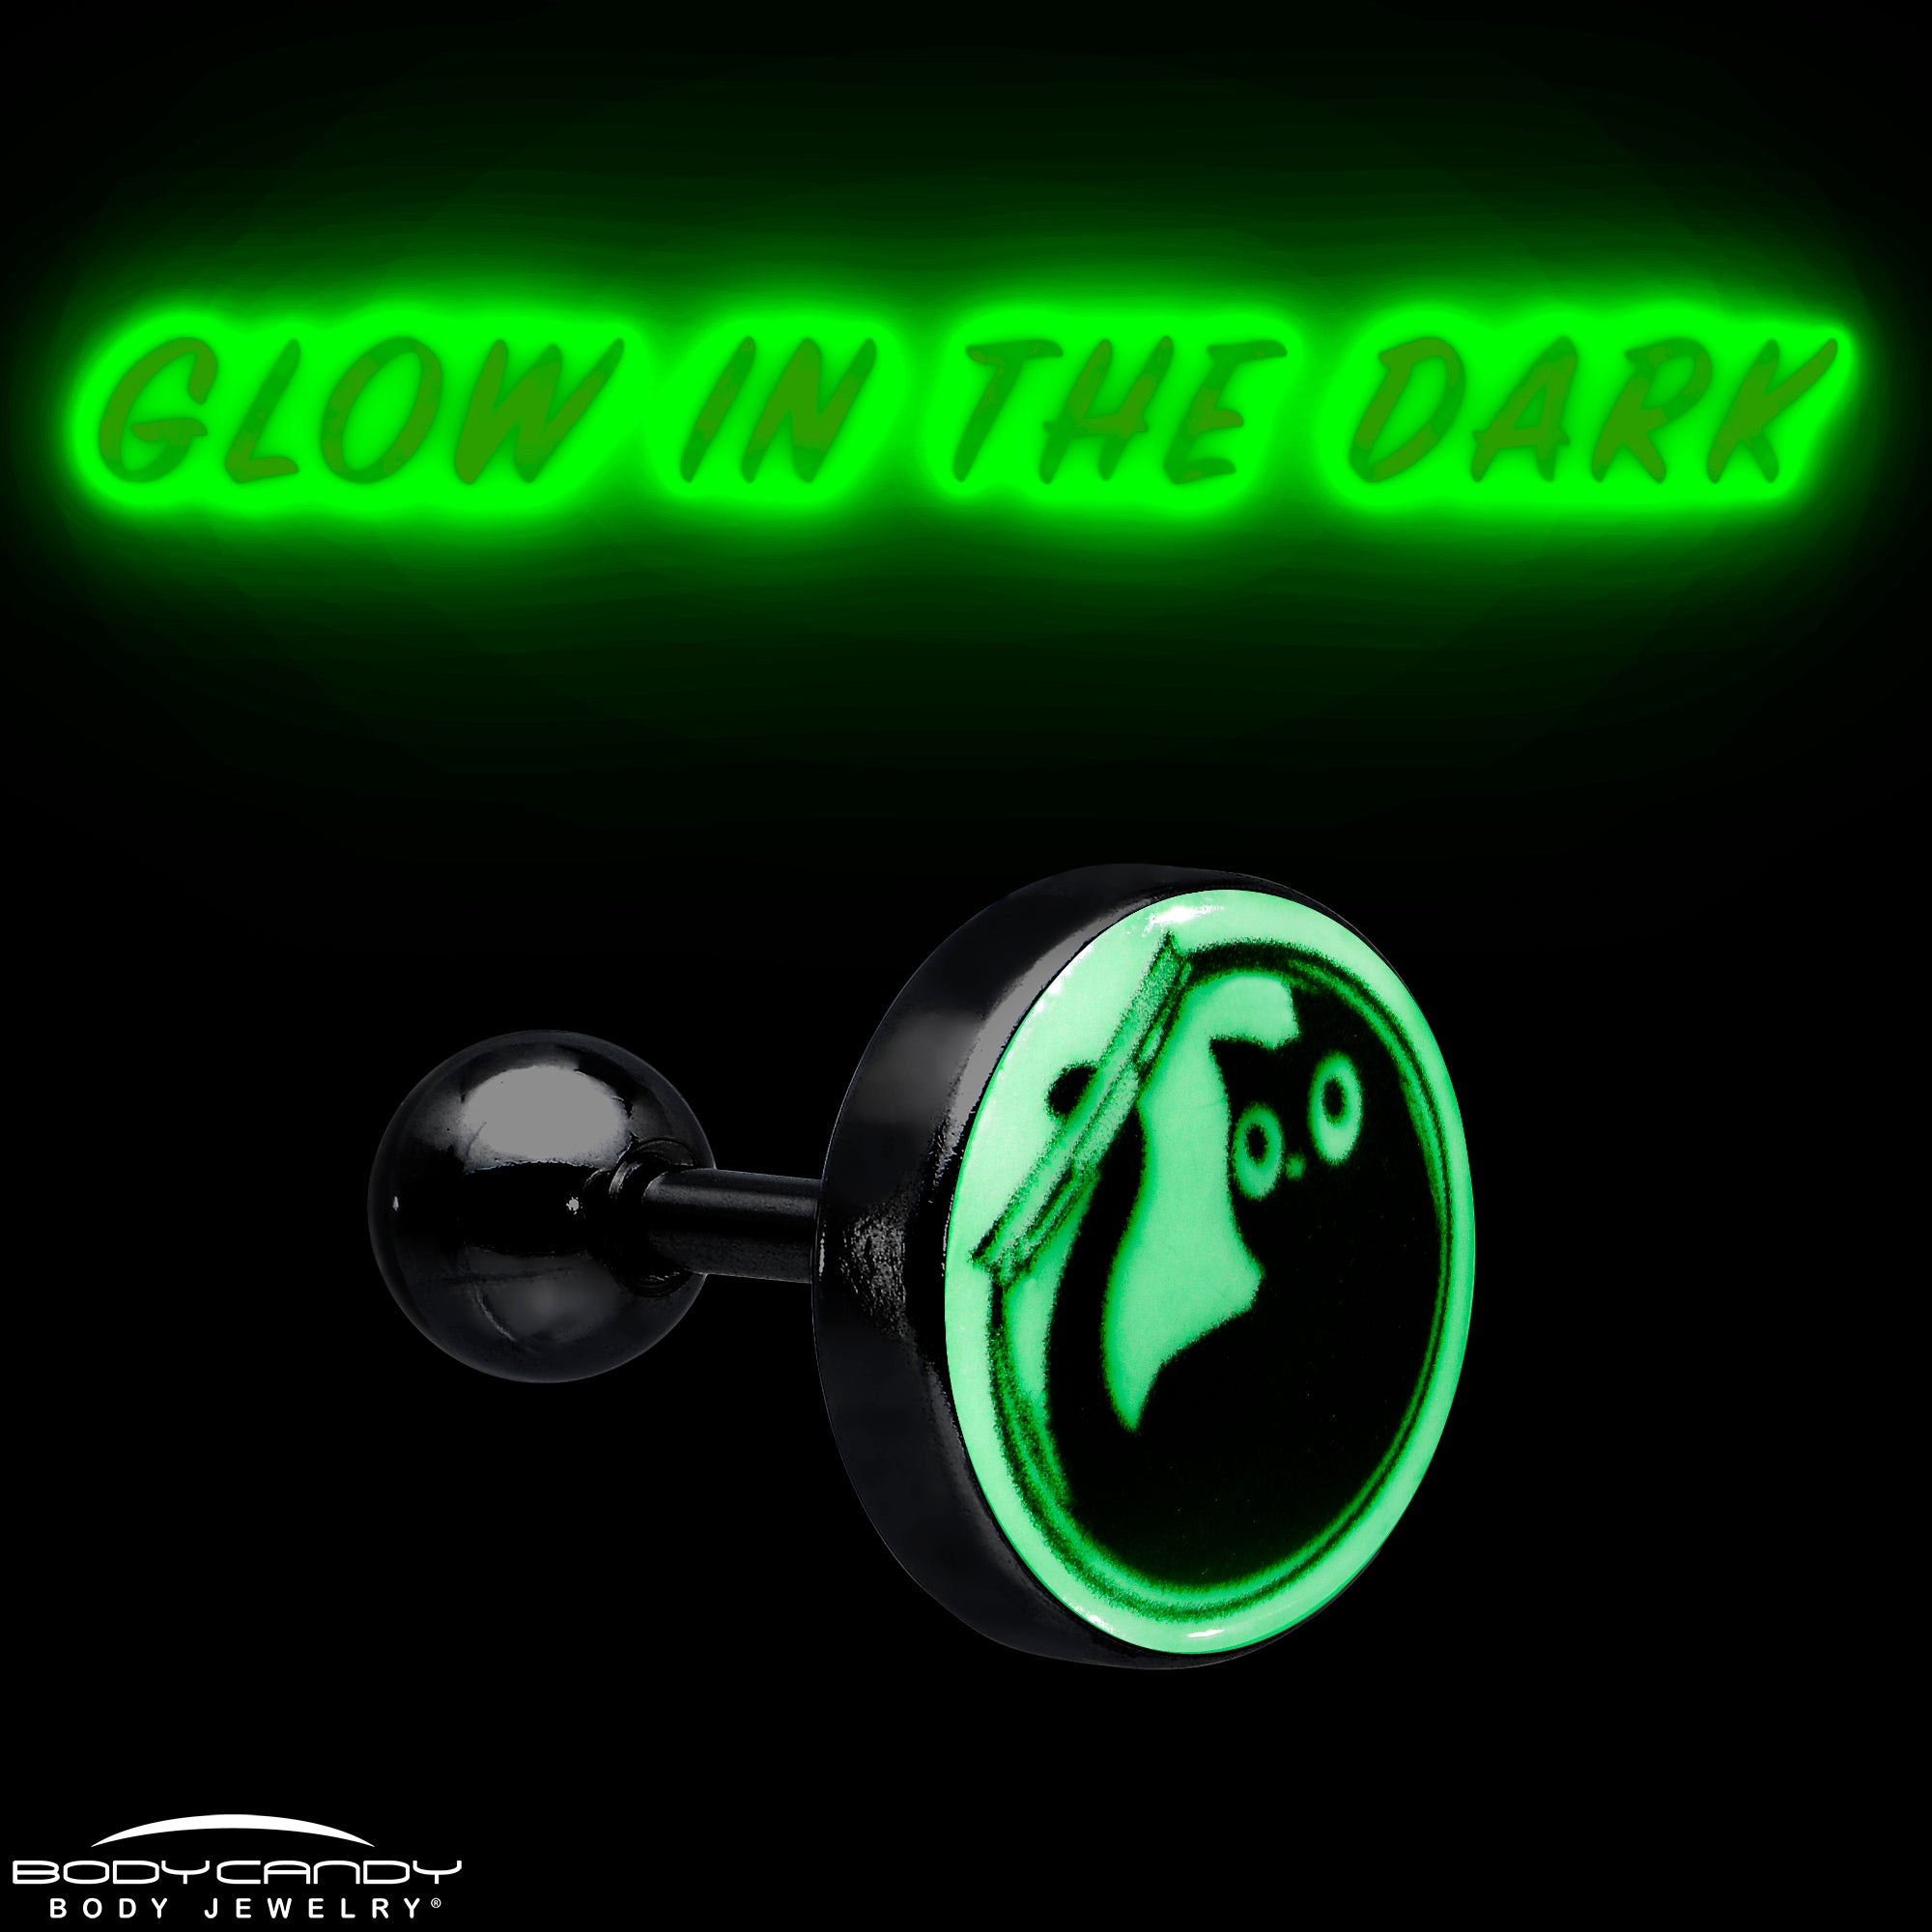 16 Gauge Glow in the Dark Fishbowl Kitty Cat Tragus Cartilage Earring